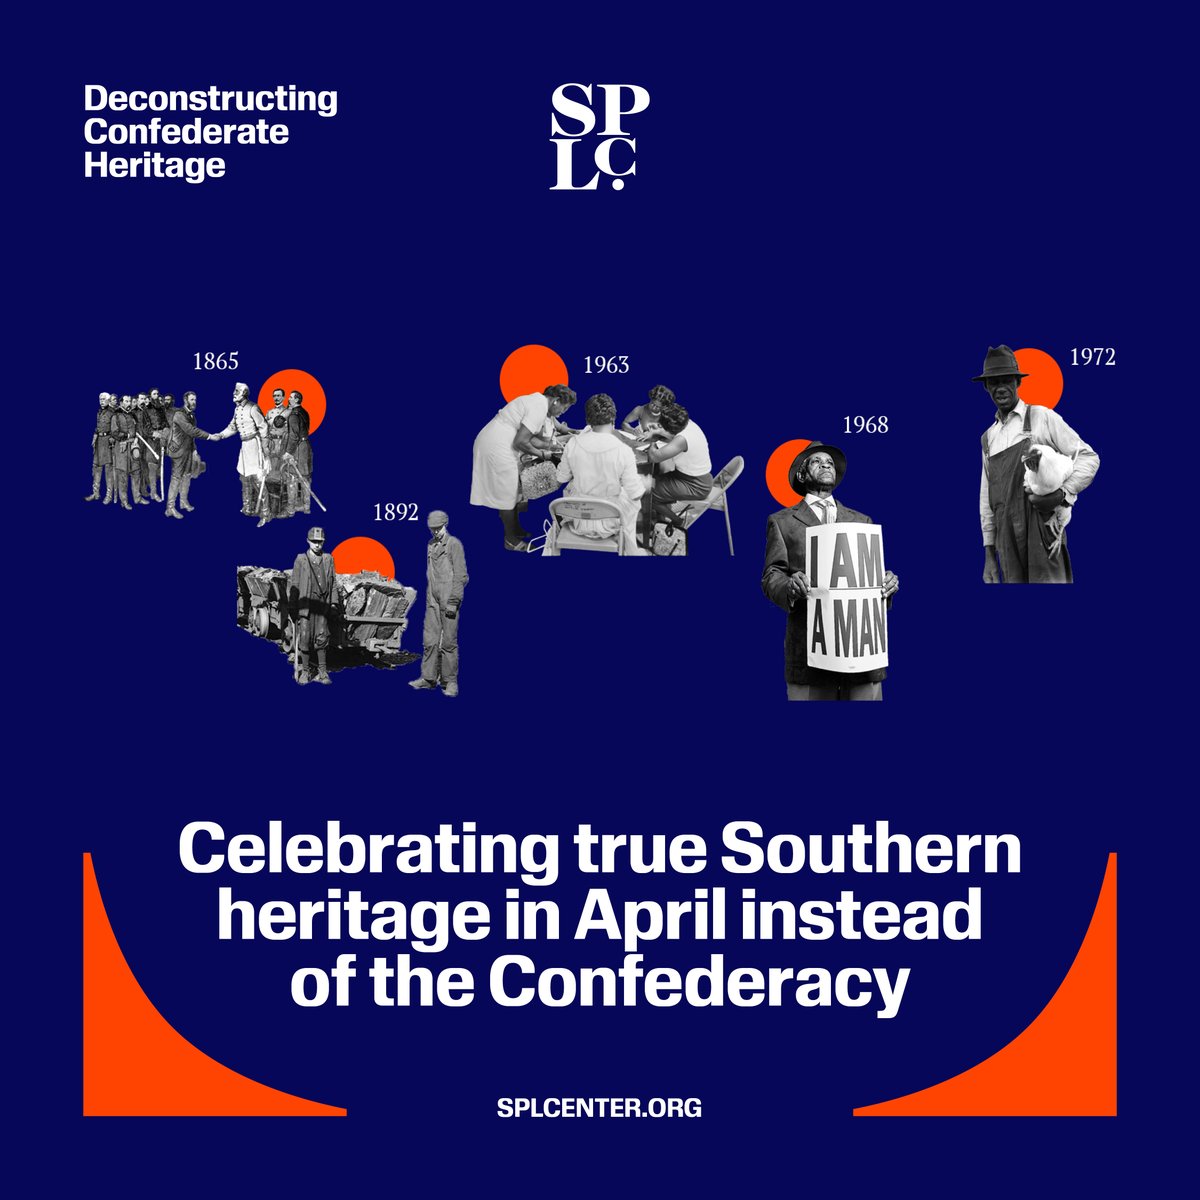 🎯FACT: Confederates fought for slavery & white supremacy. That is Confederate heritage – NOT Southern heritage.

We should never celebrate white supremacy. Join the SPLC in honoring these true Southern contributions to justice & culture ✊: bit.ly/49sKO5f #WhoseHeritage